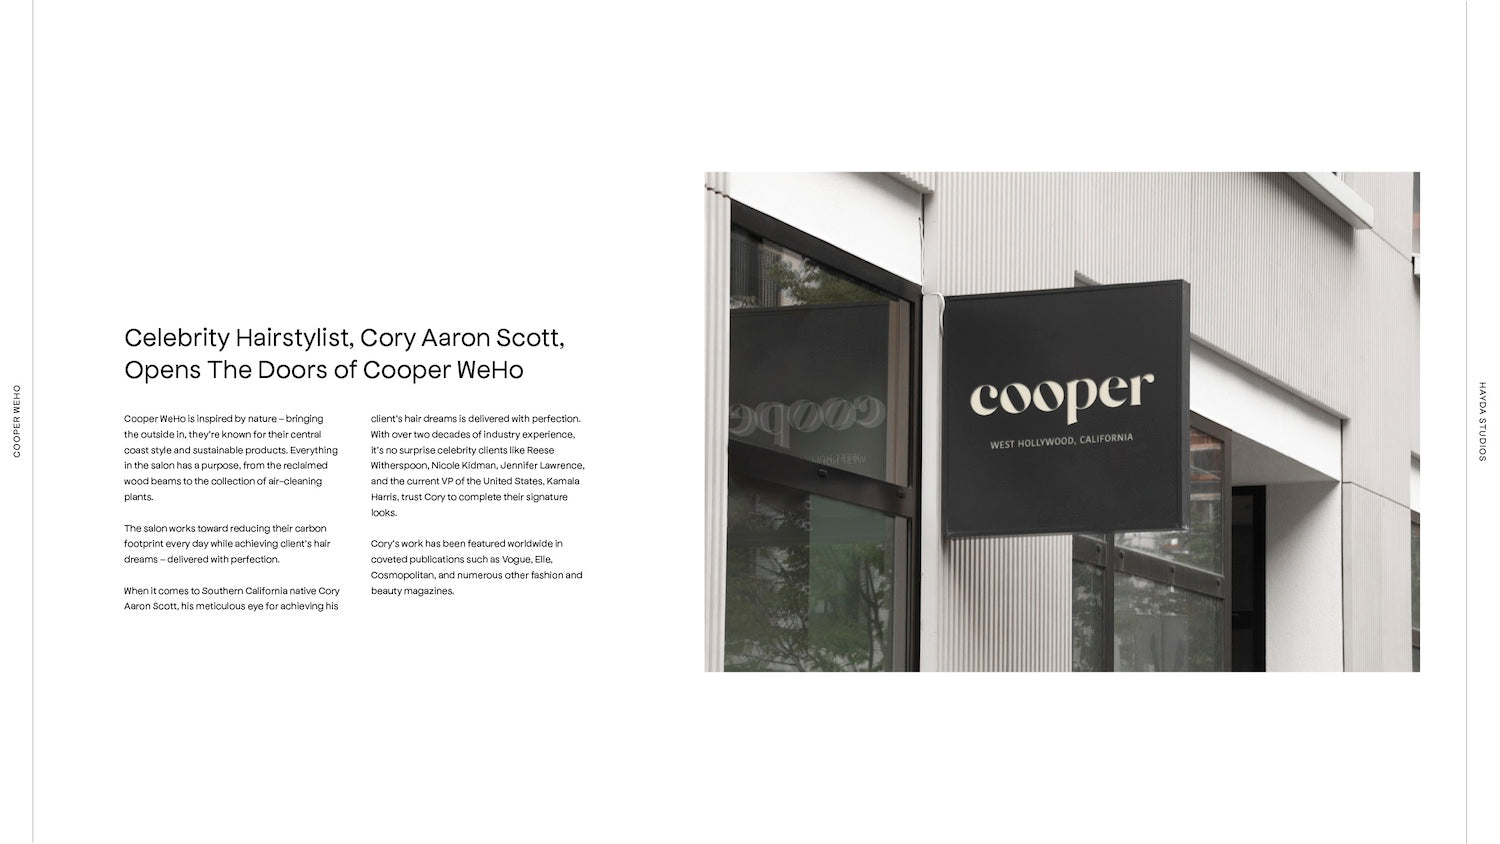 biography about cooper west hollywood